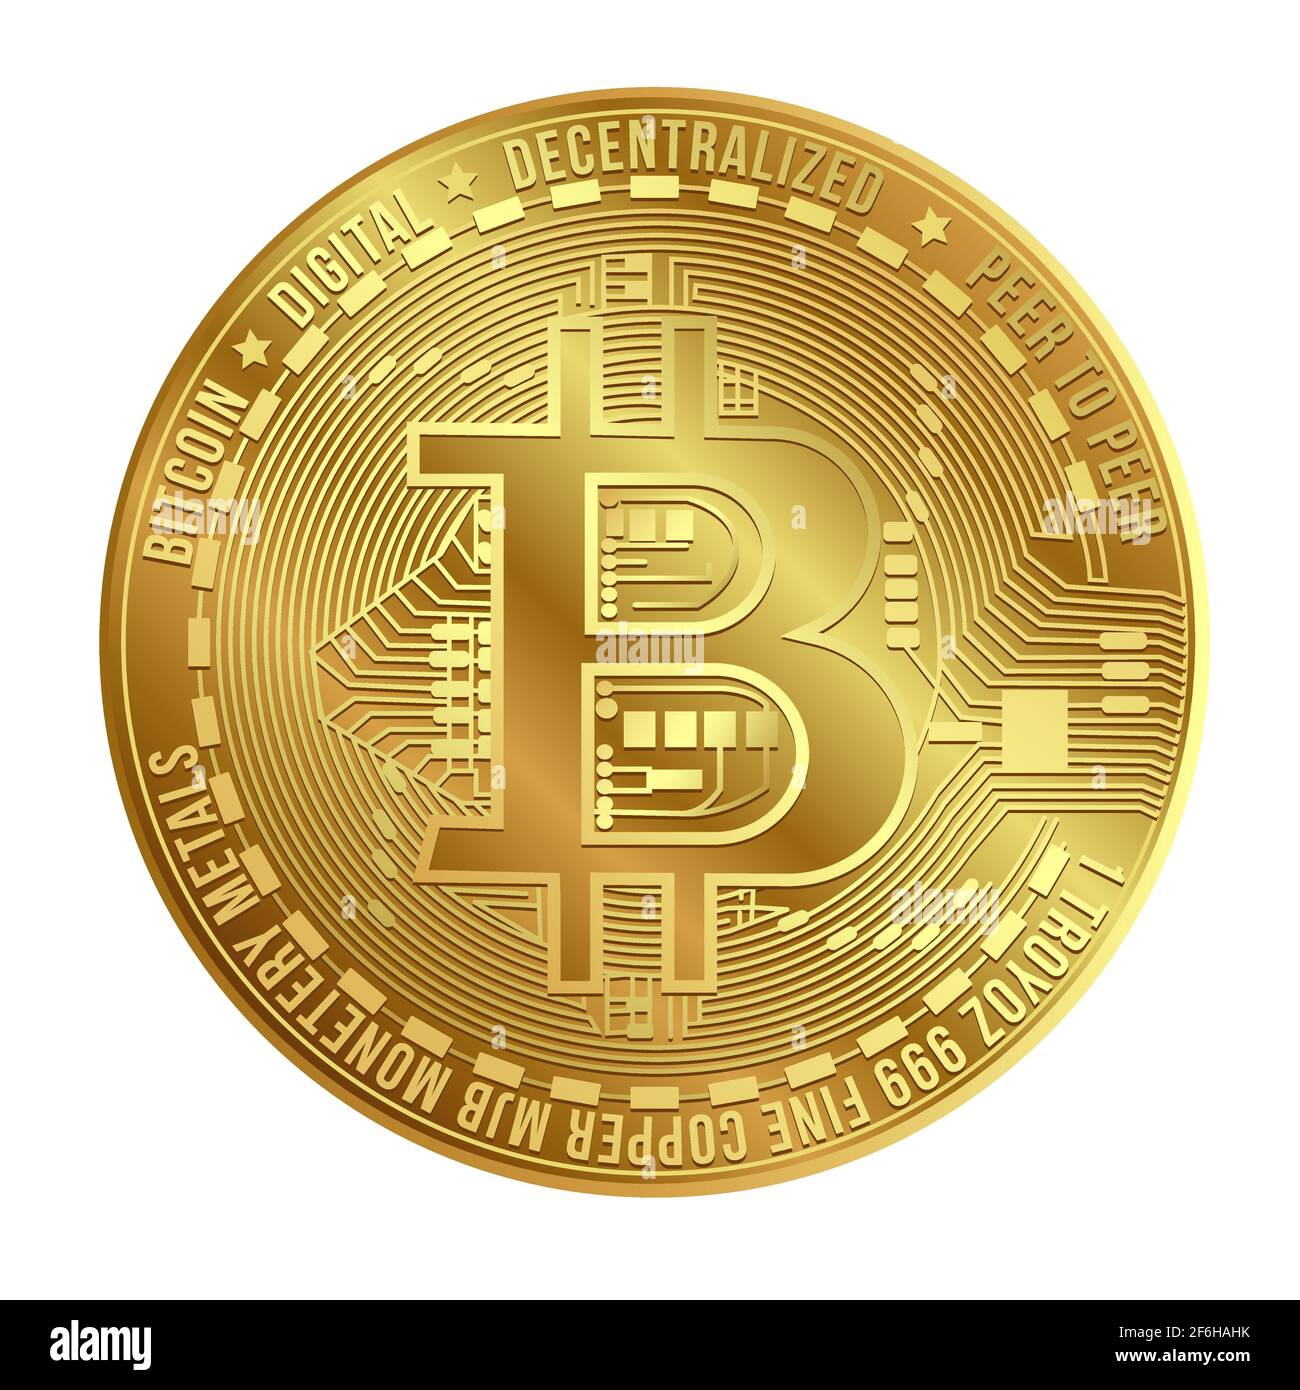 Gold virtual bitcoin coin isolated on white background. Popular cryptocurrency. Bitcoin digital money concept. Stock Vector